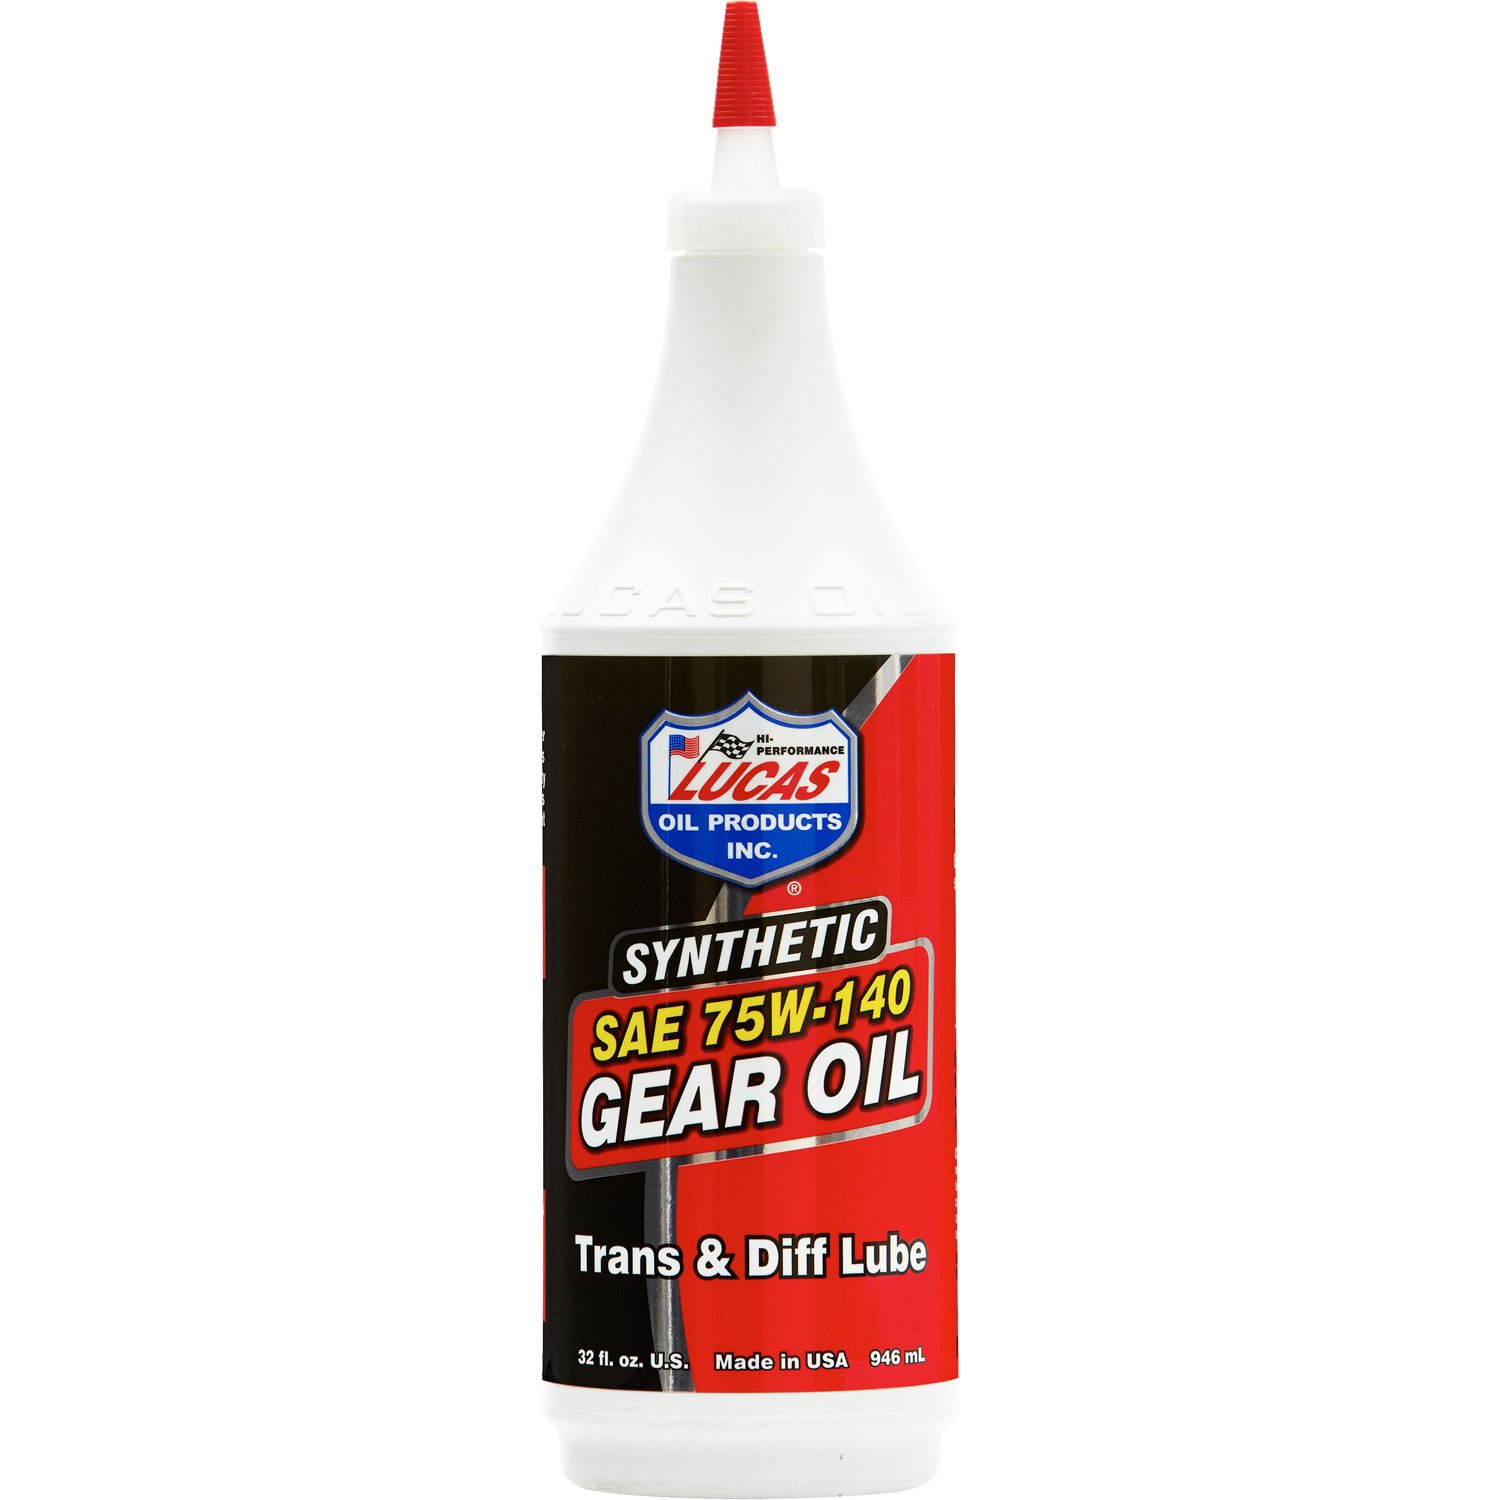 Synthetic Gear Oil SAE 75W-140